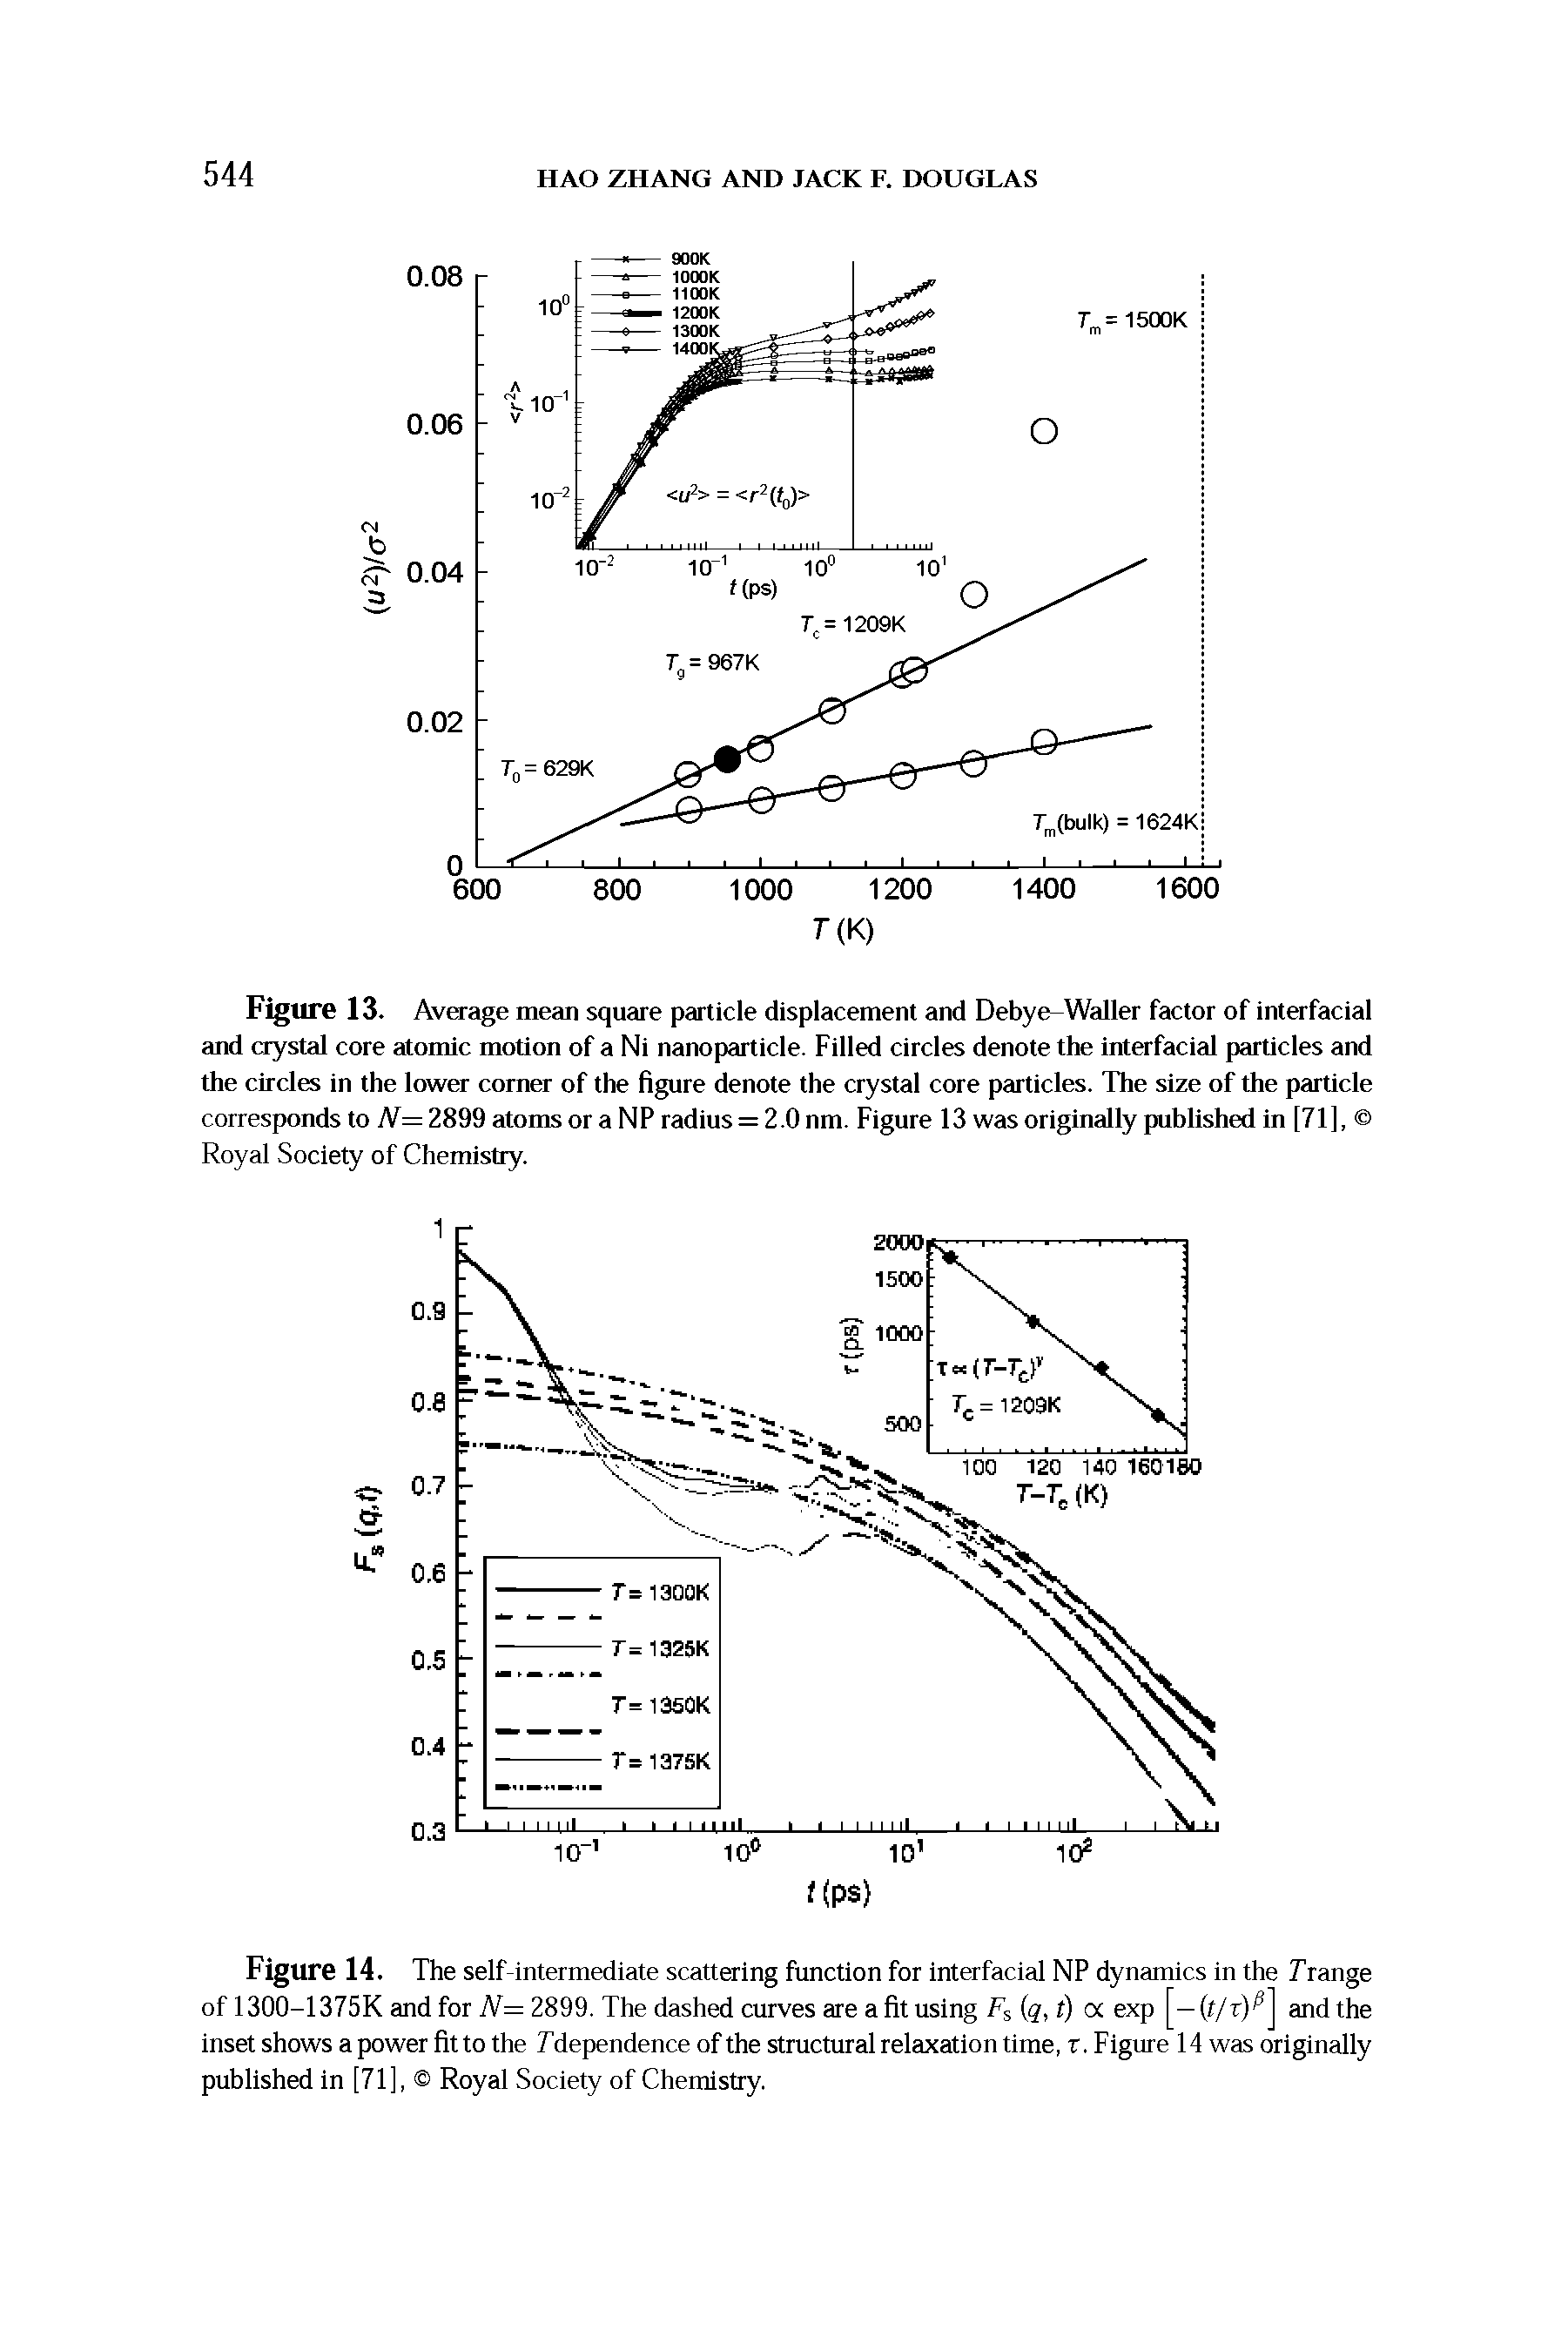 Figure 14. The self-intermediate scattering function for interfacial NP dynamics in the Trange of 1300-1375K and for Al= 2899. The dashed curves are a fit using Fs ( , t) a exp [—(t/r) ] and the inset shows a power fit to the /"dependence of the structural relaxation time, r. Figure 14 was originally published in [71], Royal Society of Chemistry.